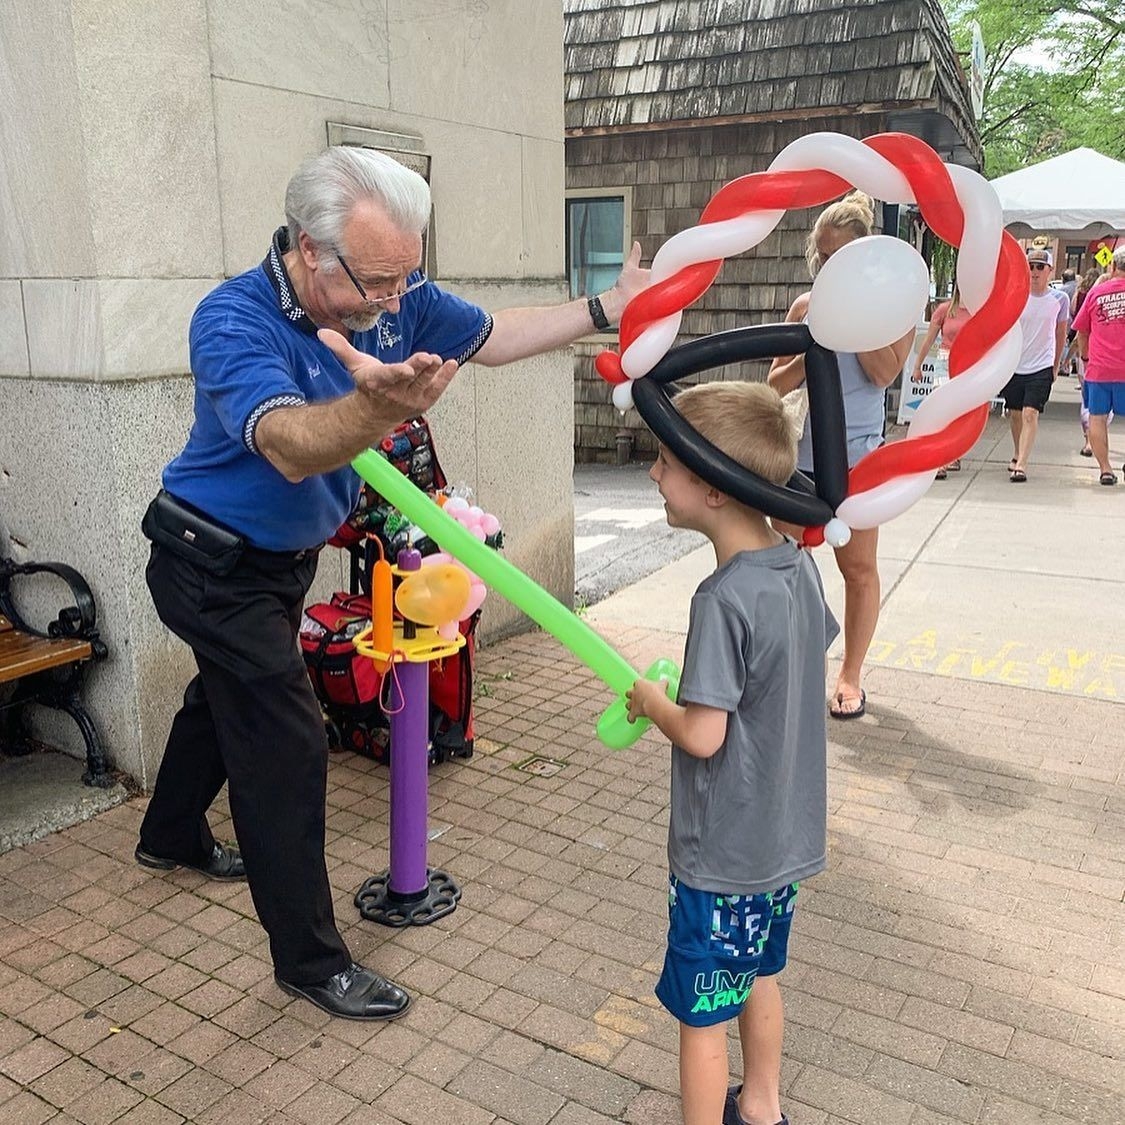 A man puts a balloon hat onto a child's head at the Skaneateles Curbstone Festival